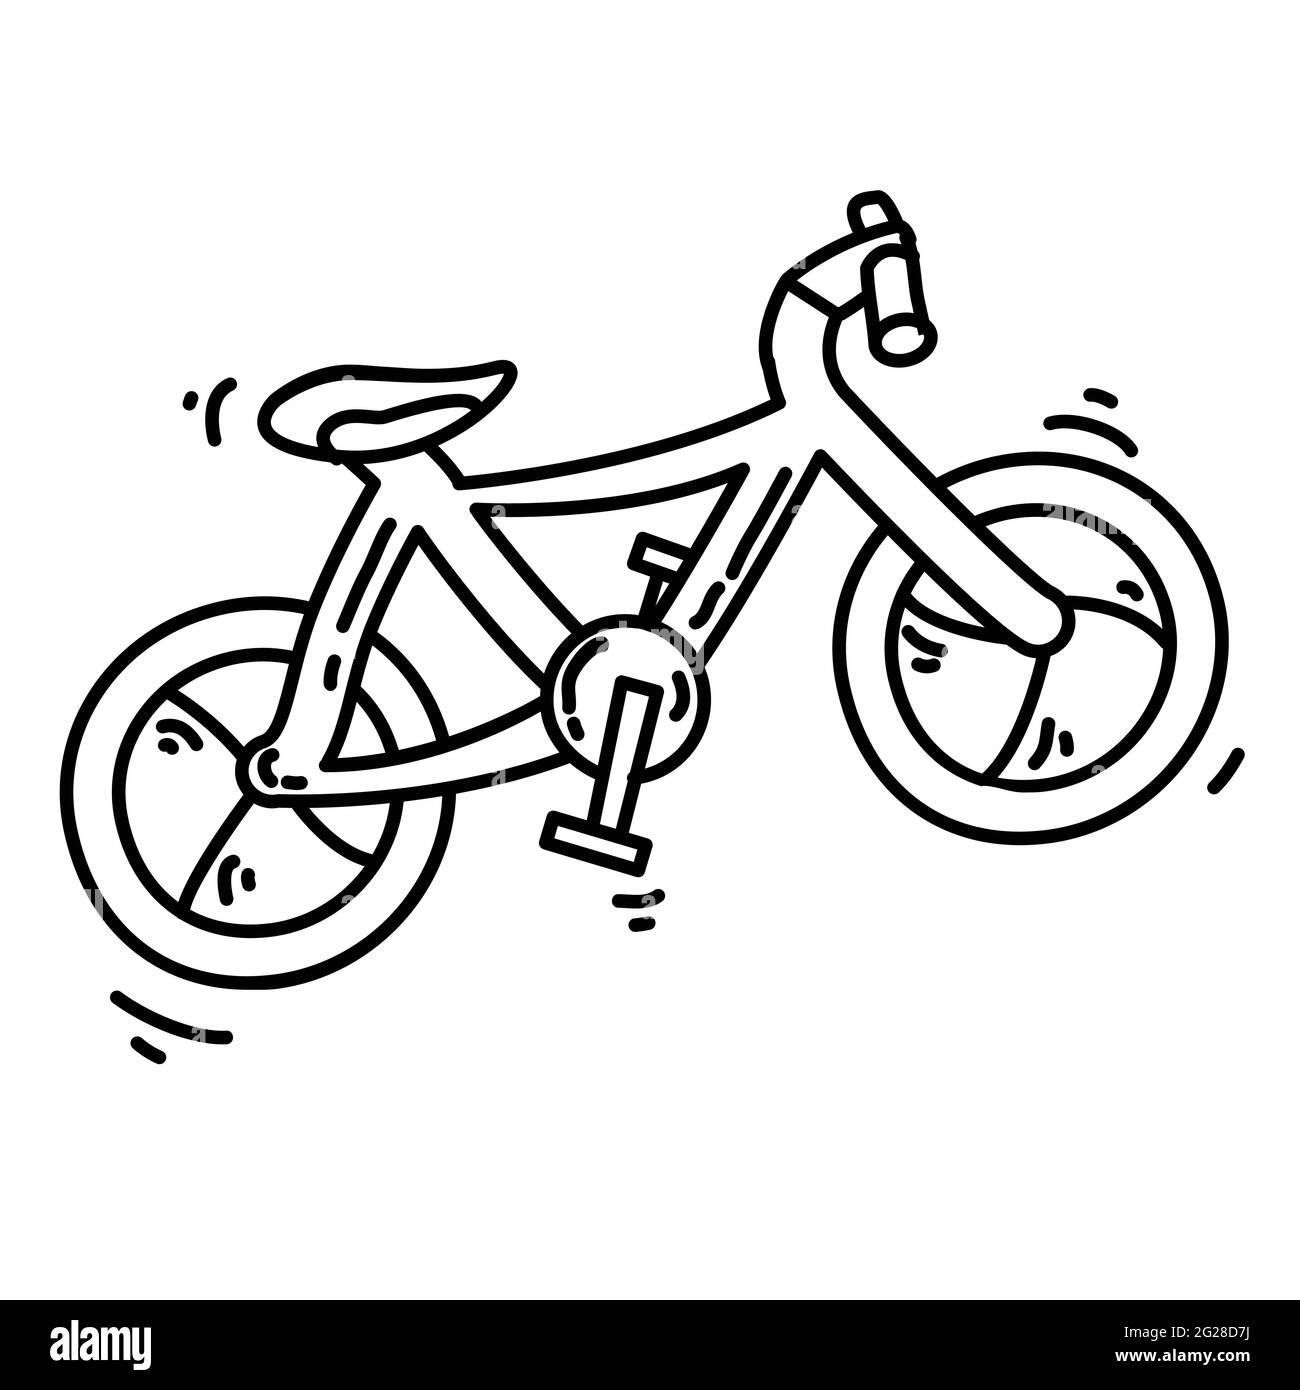 Hiking adventure bike ,trip,travel,camping. hand drawn icon design, outline black, doodle icon vector icon Stock Vector